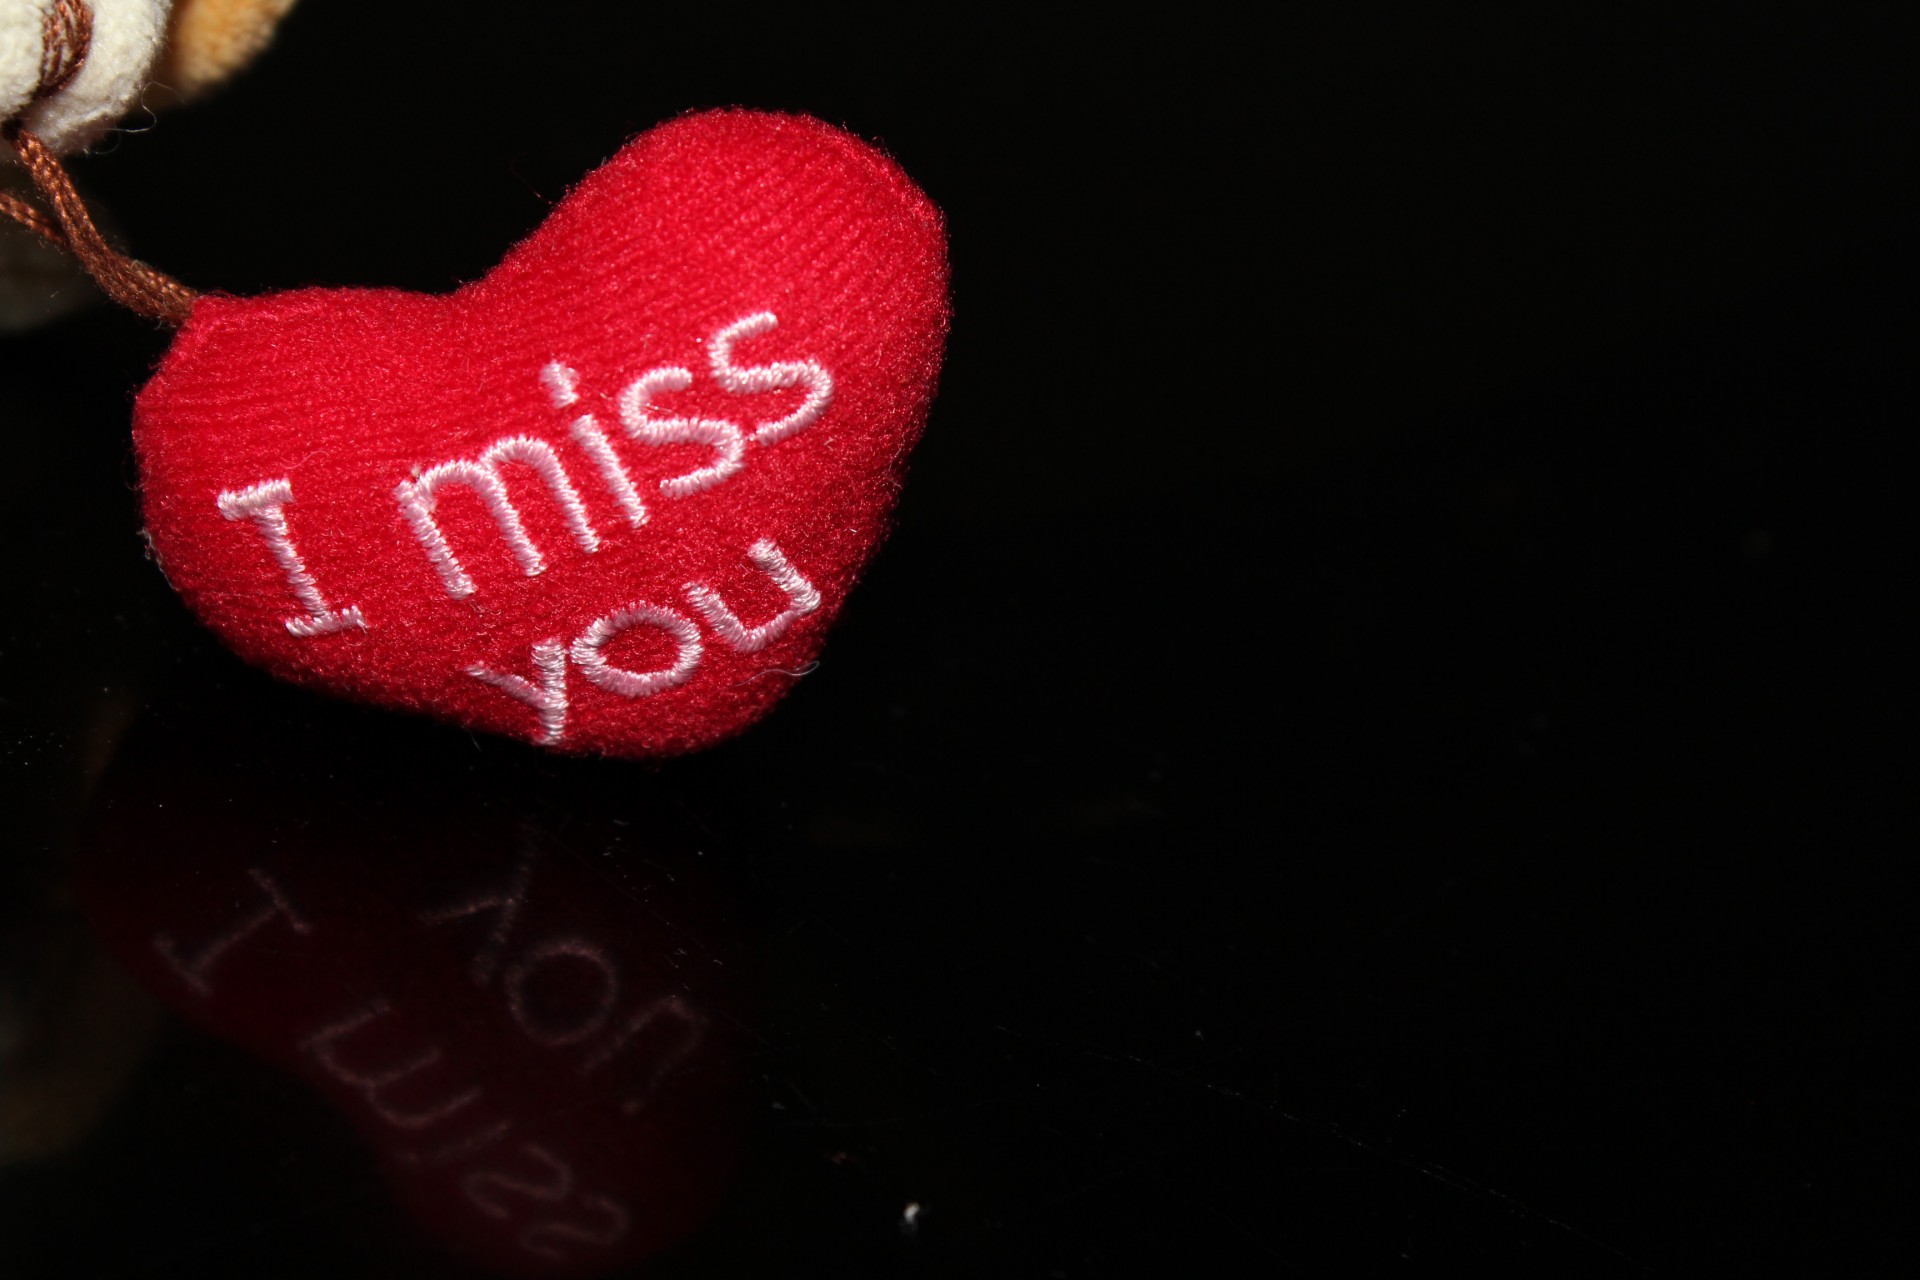 heart,stuff toy,gift,miss,emotion,i miss you,red heart,valentine's day...